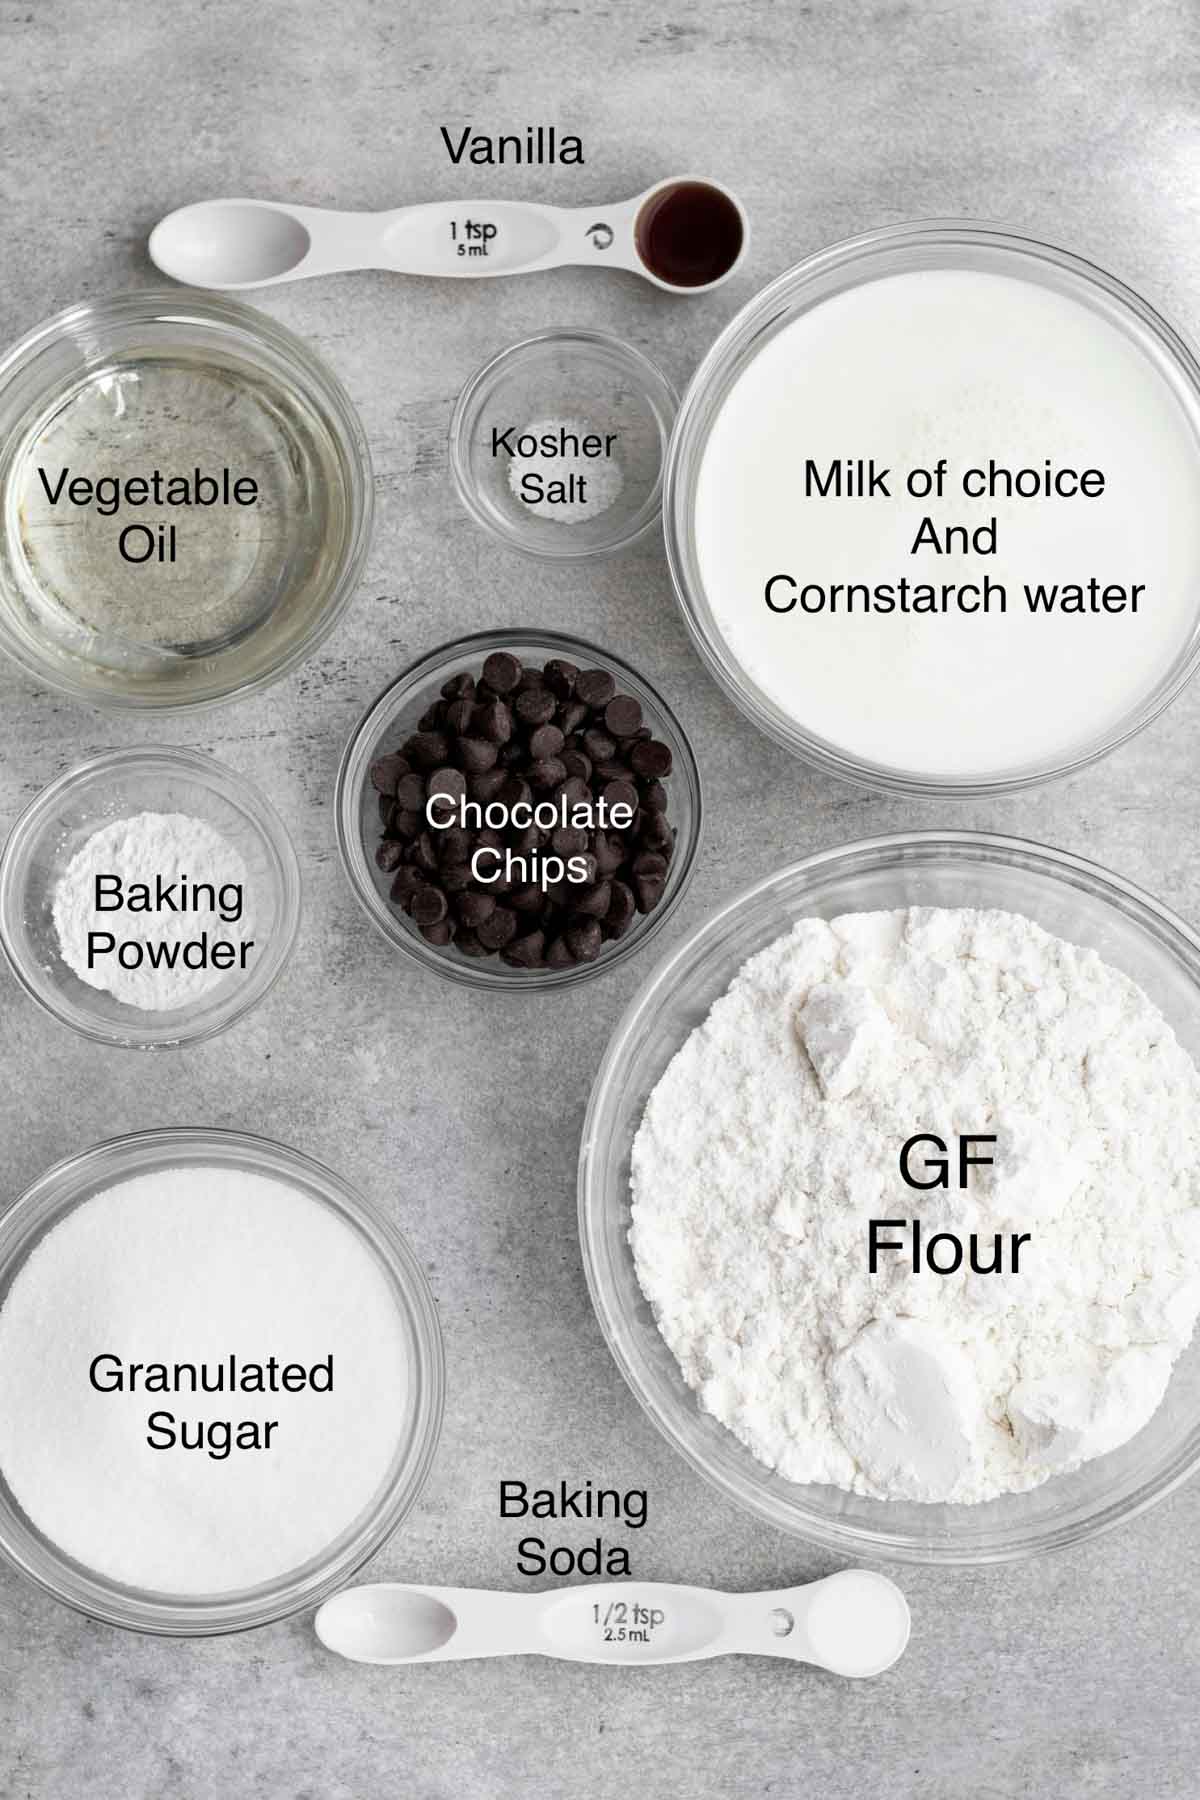 All of the ingredients in separate containers with text over them.